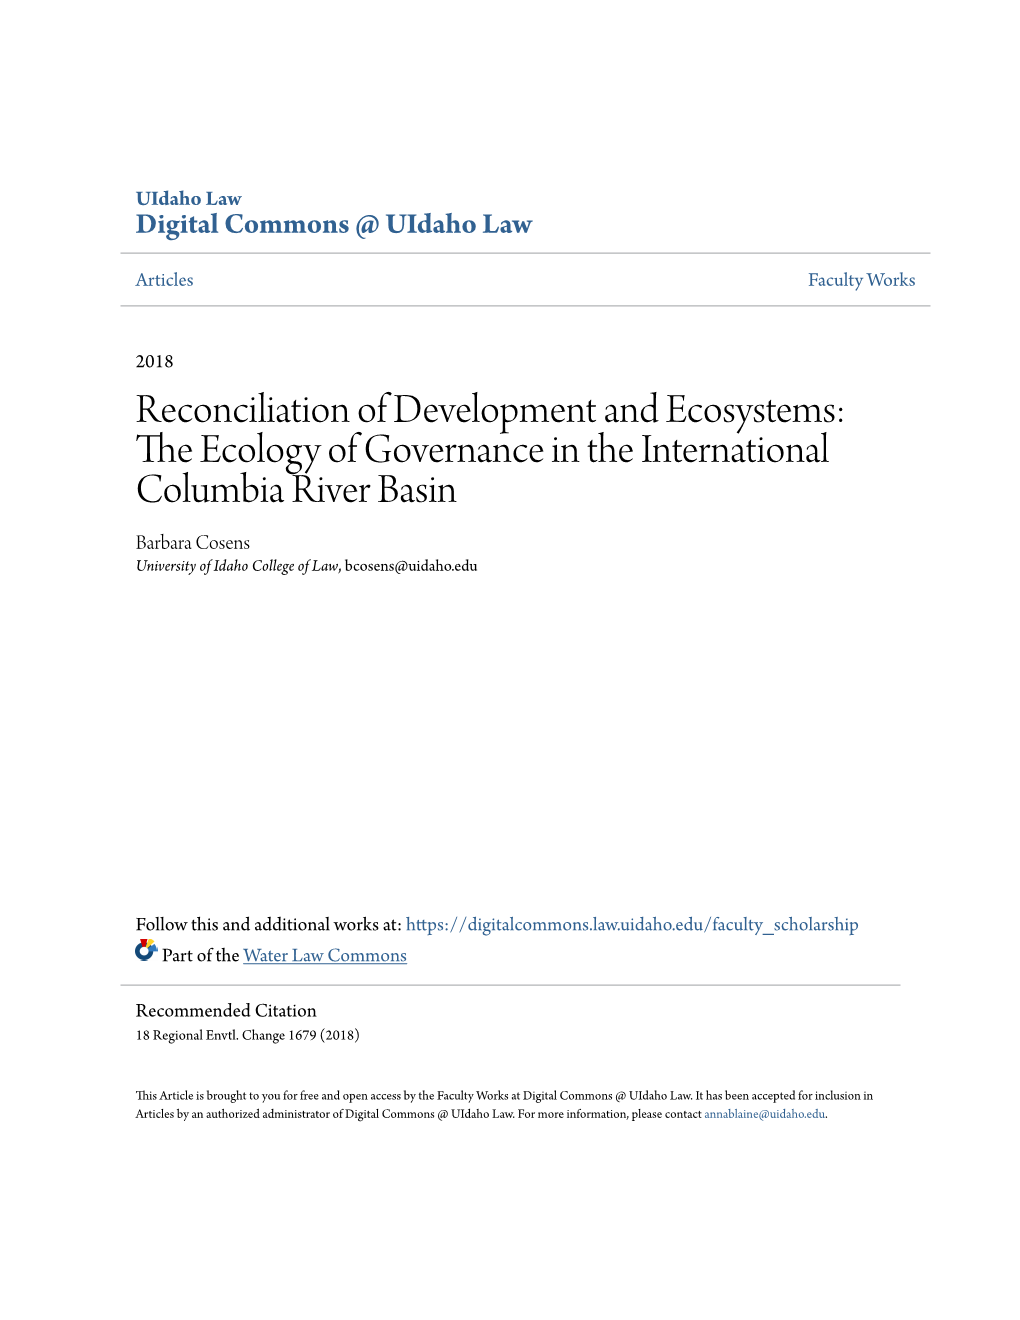 The Ecology of Governance in the International Columbia River Basin